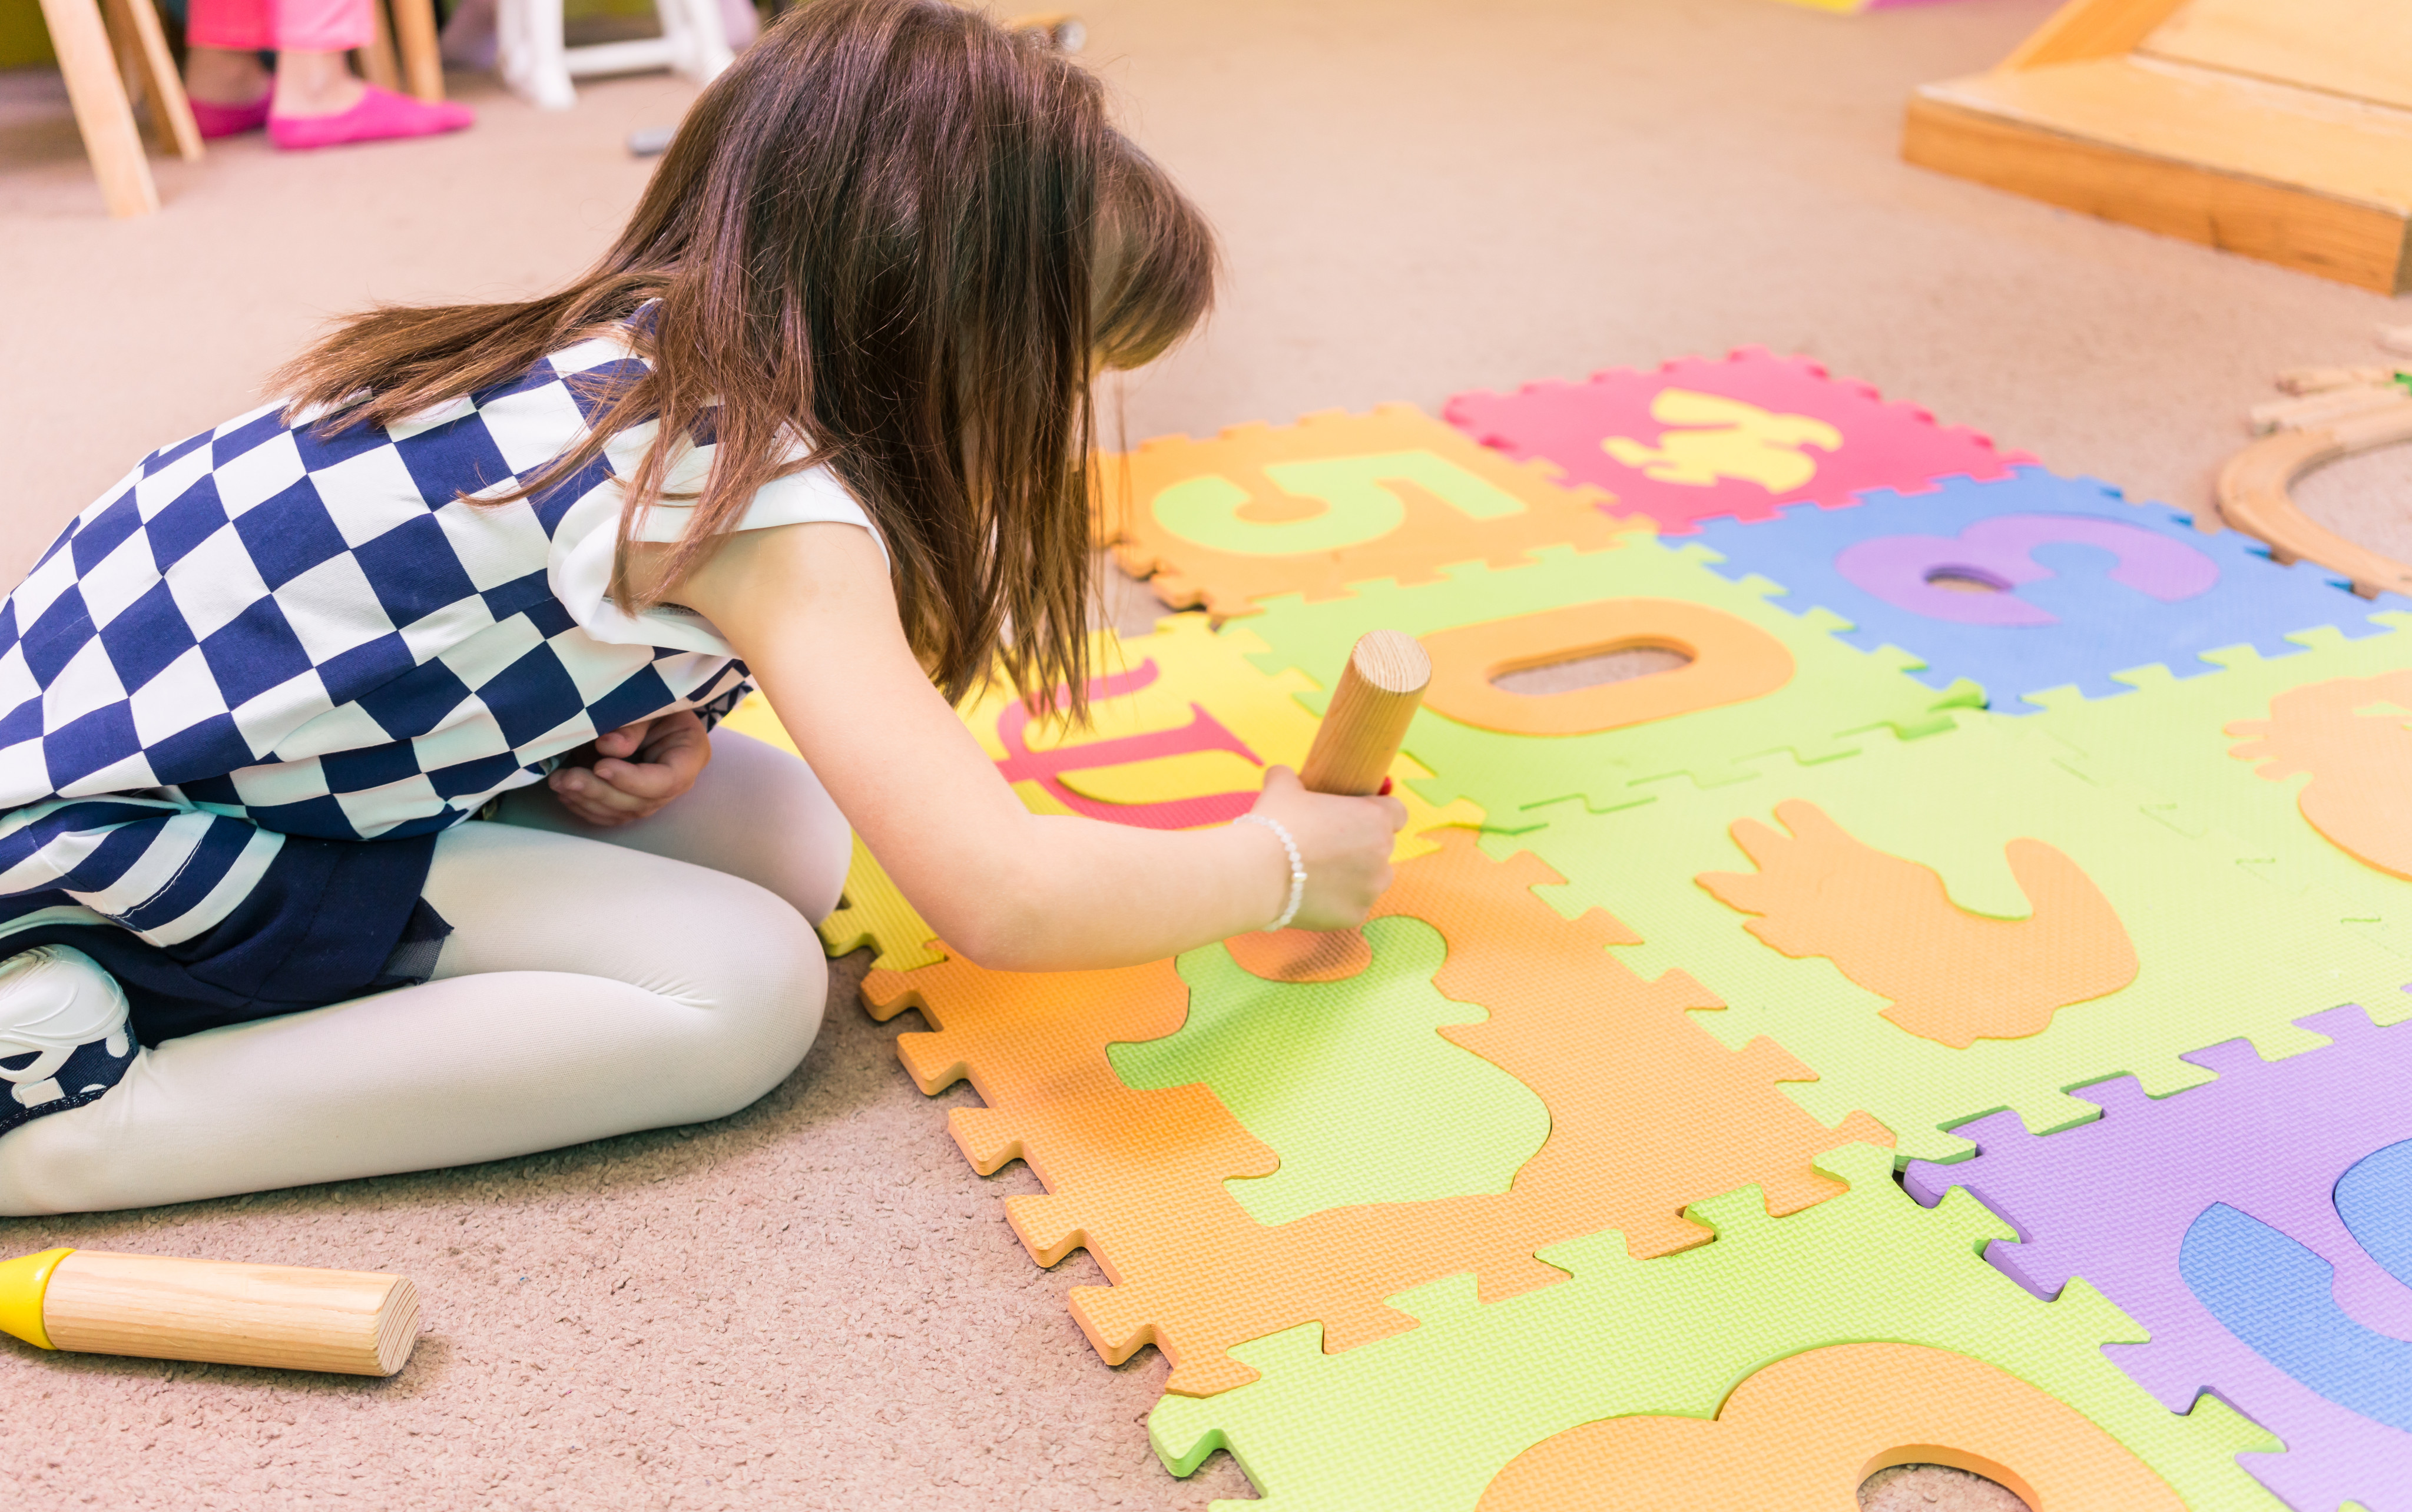 Hong Kong’s consumer watchdog has called for restrictions on the levels of formamide found in children’s play mats. Photo: Shutterstock